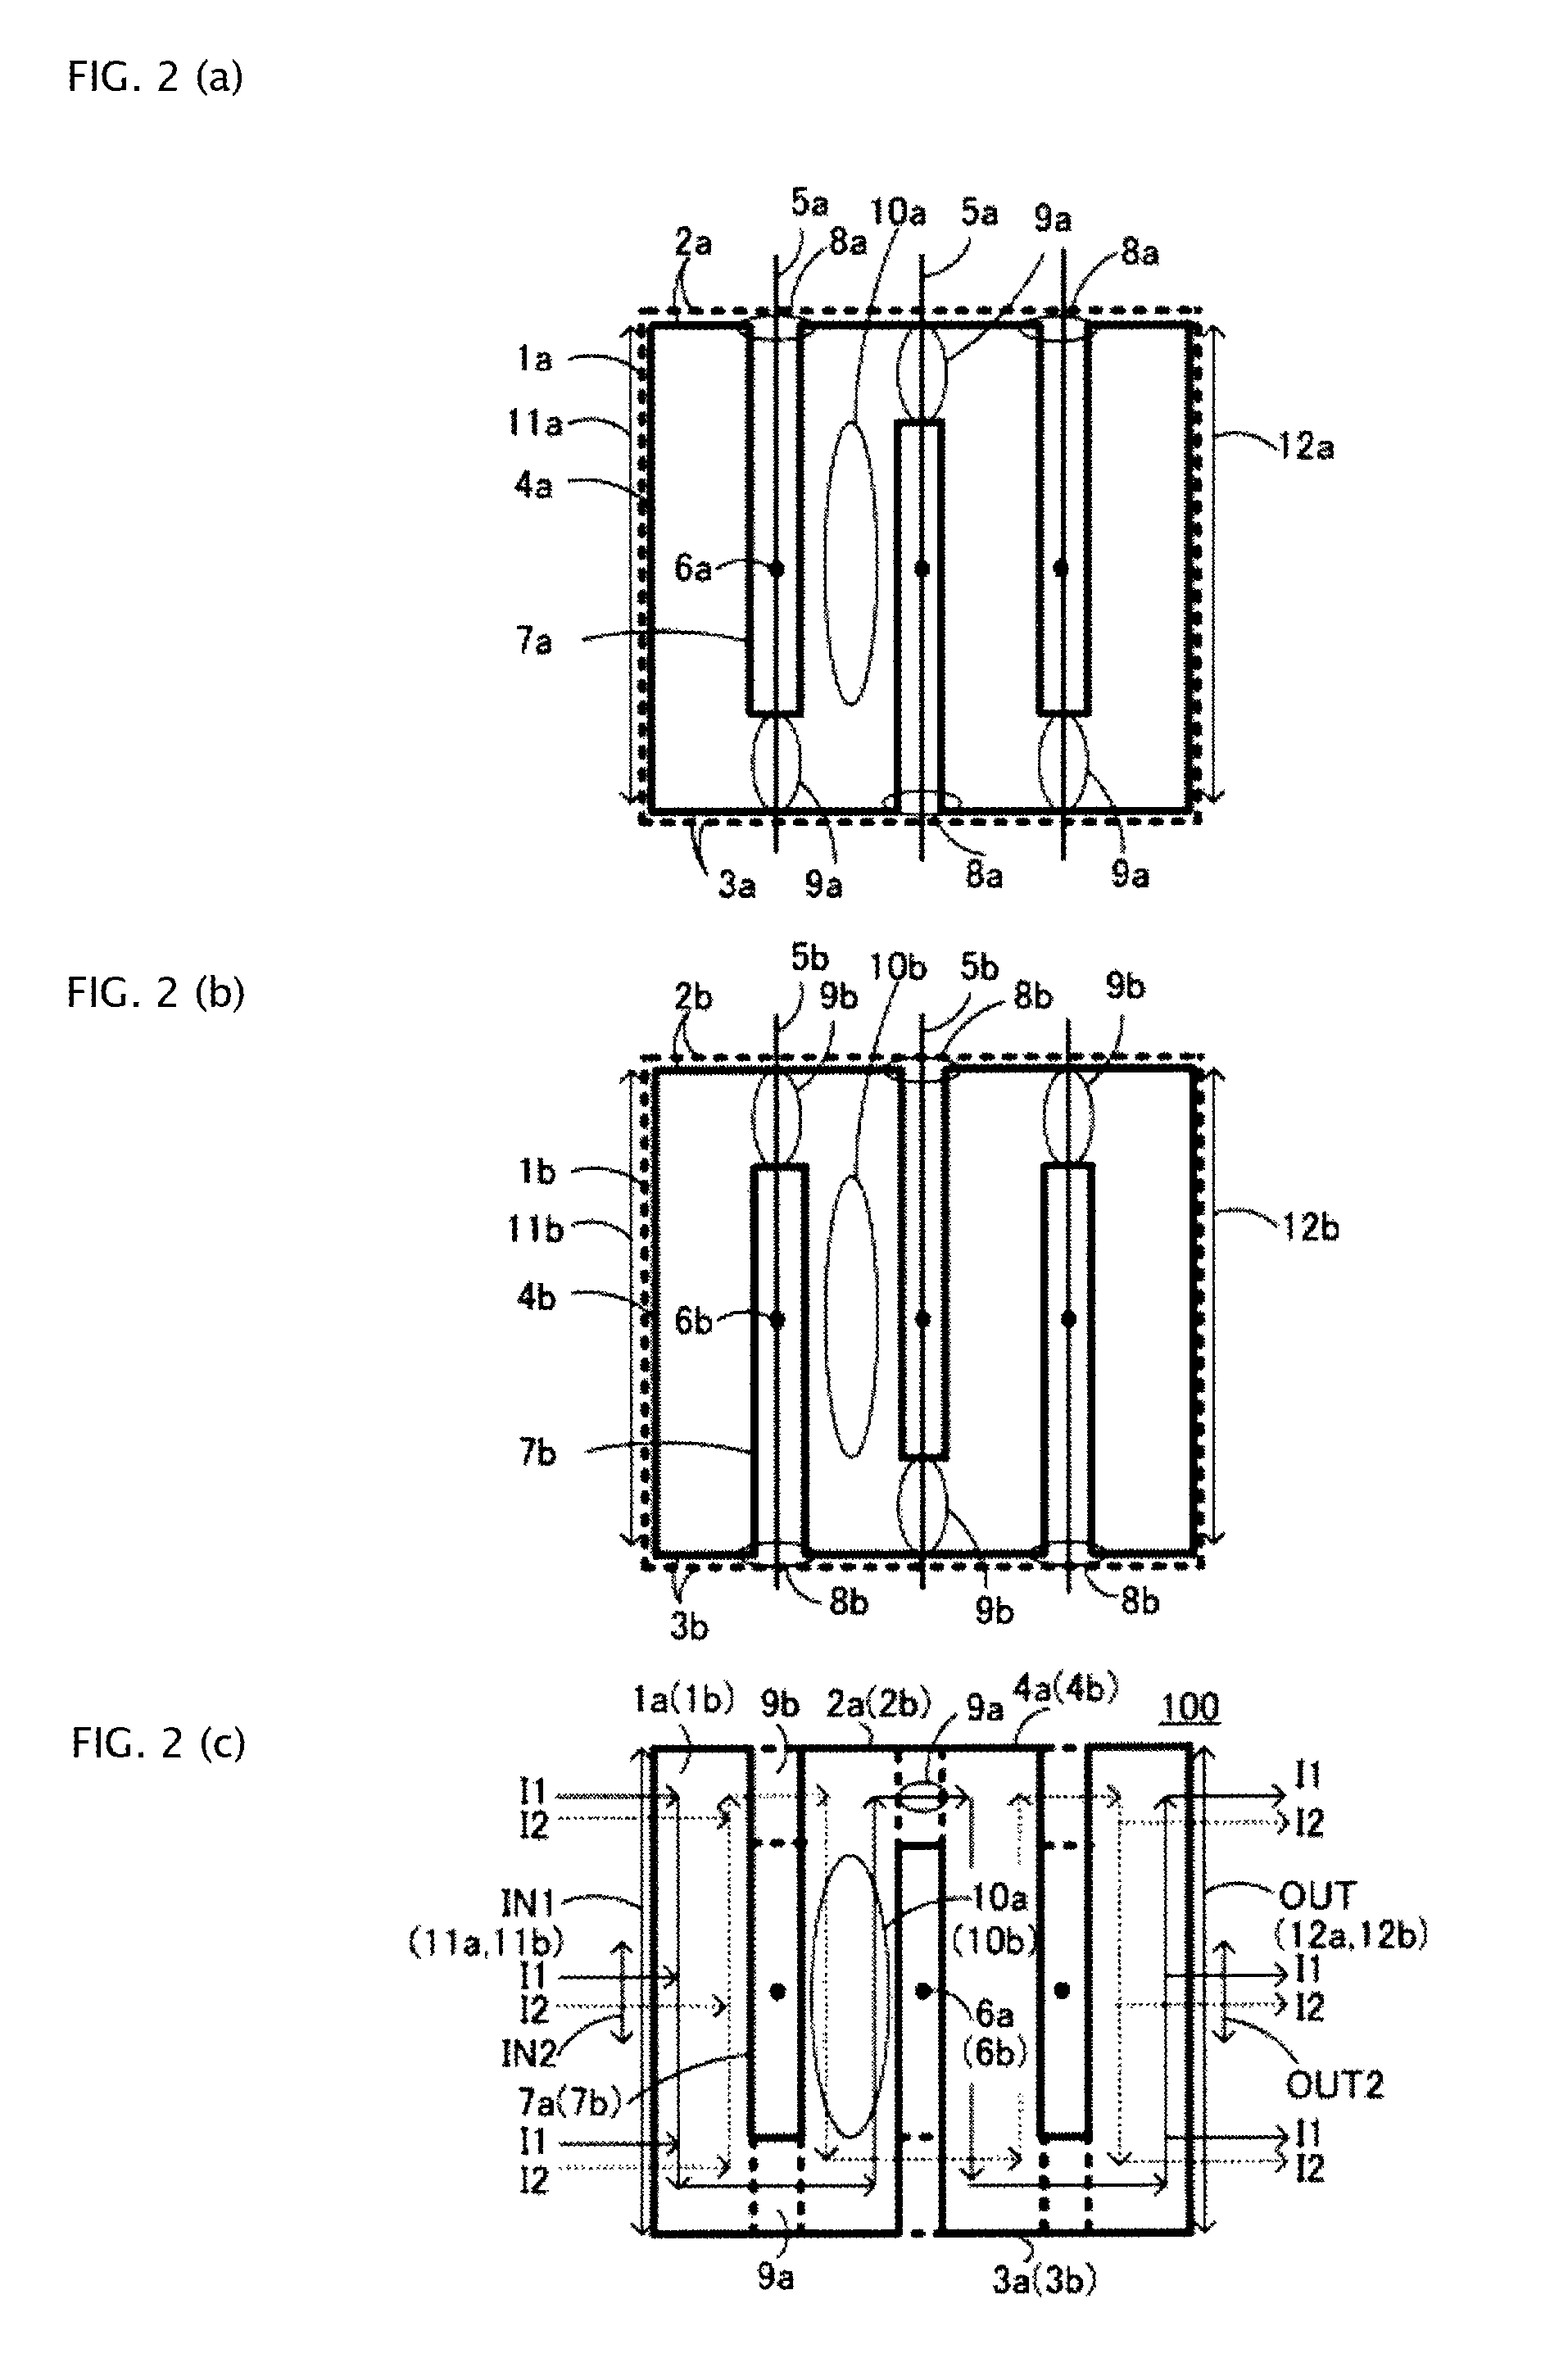 Internal wiring structure of semiconductor device